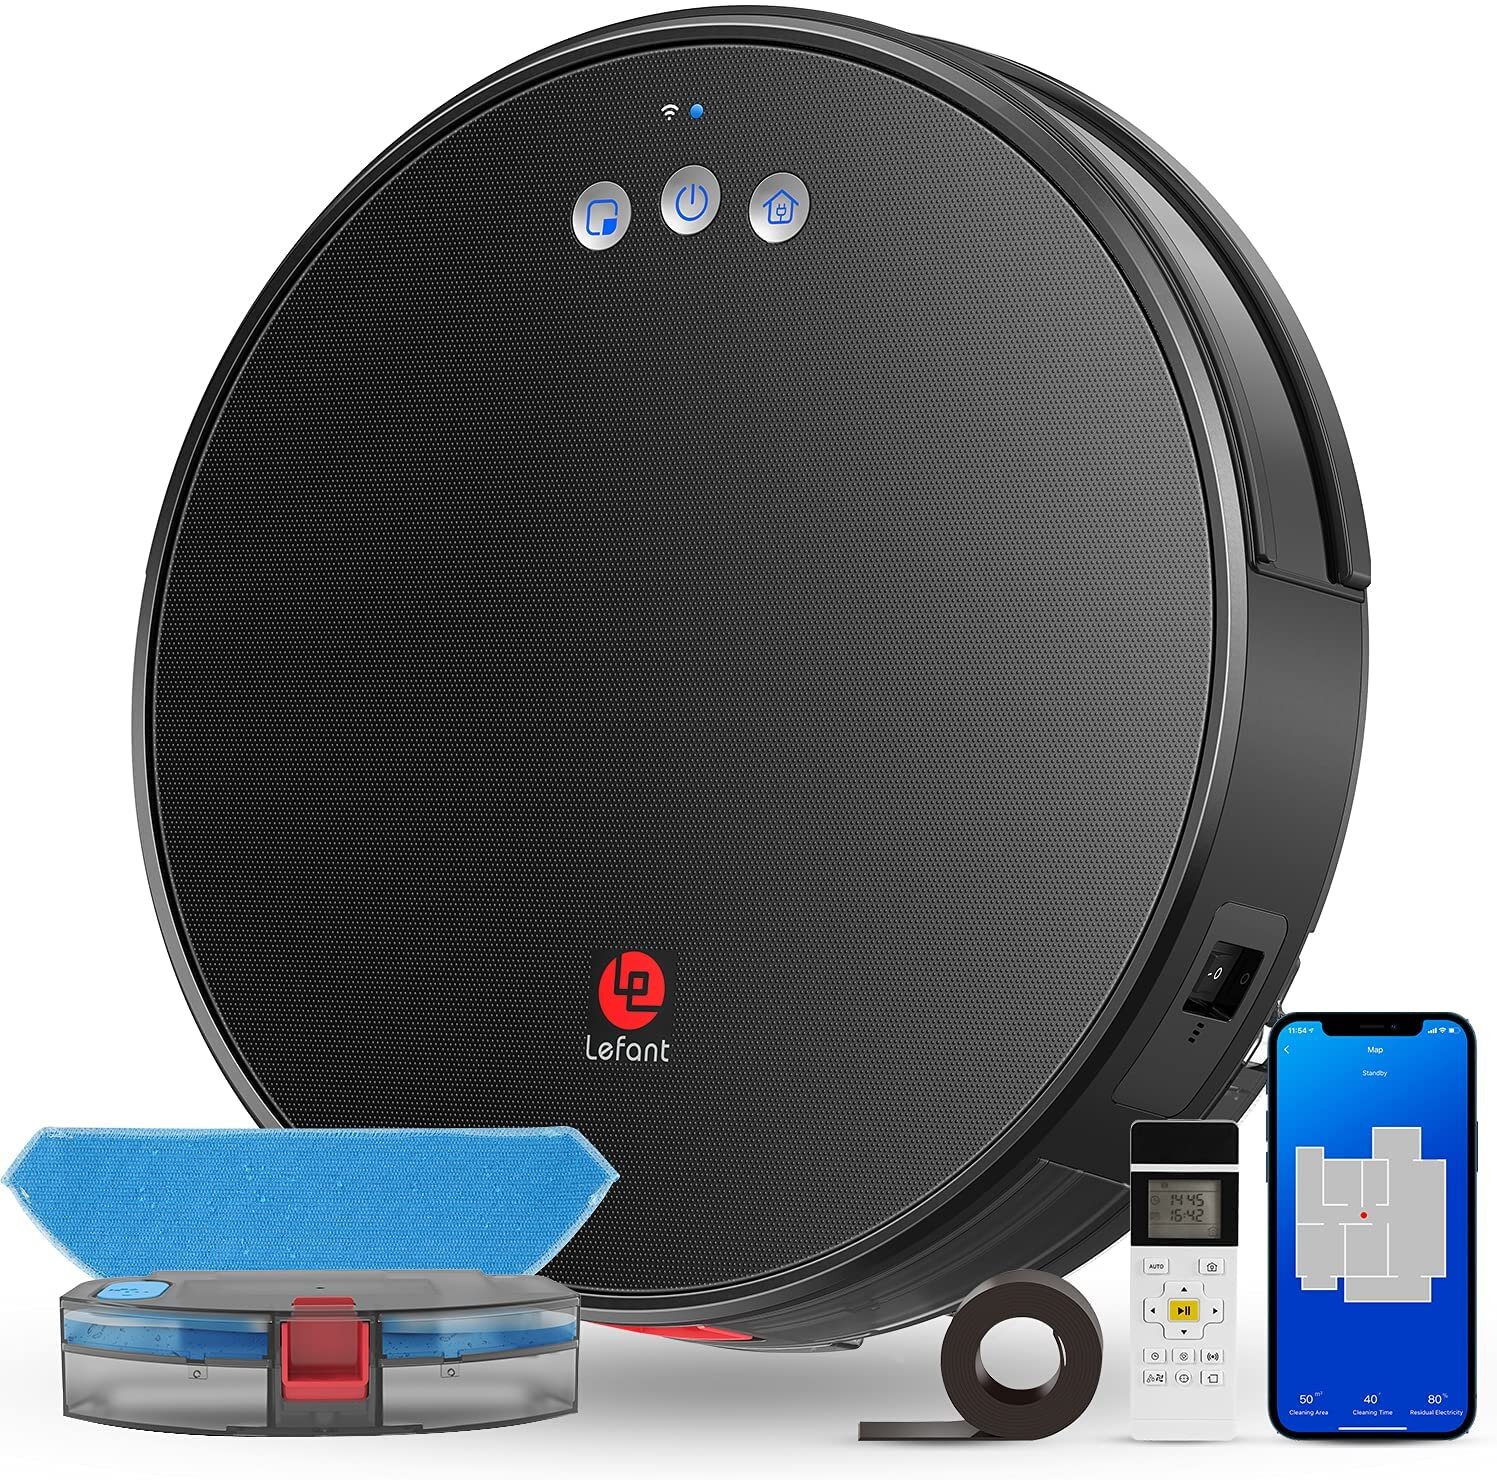  Lefant Robot Vacuum Cleaner with 2200Pa Powerful